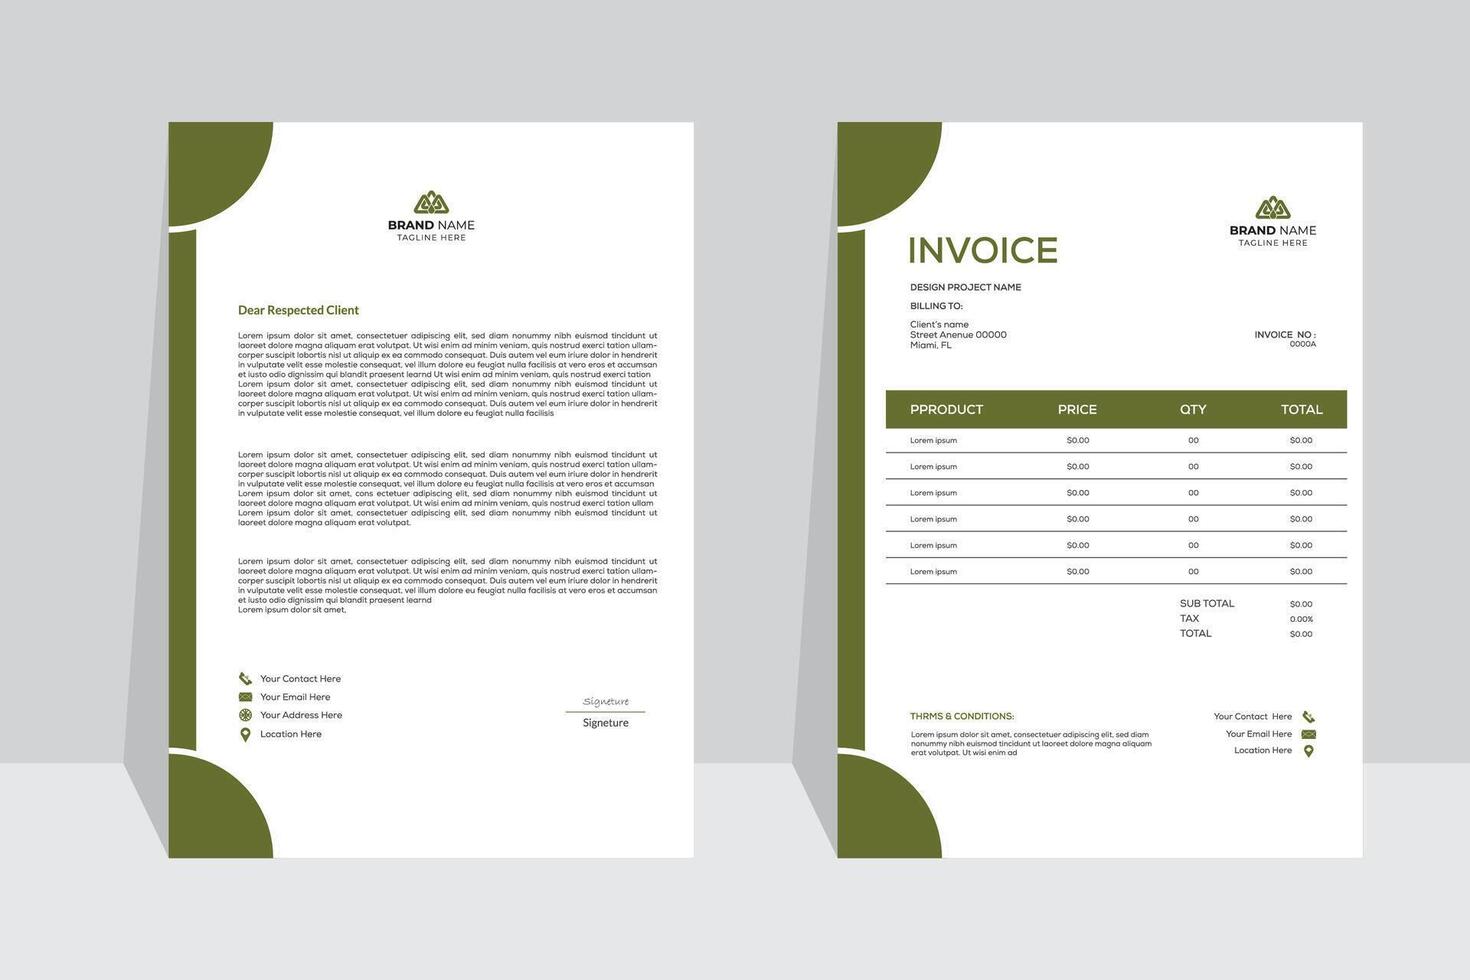 Letterhead and invoice design bundle set, with creative designs and creative colors. For your business. vector